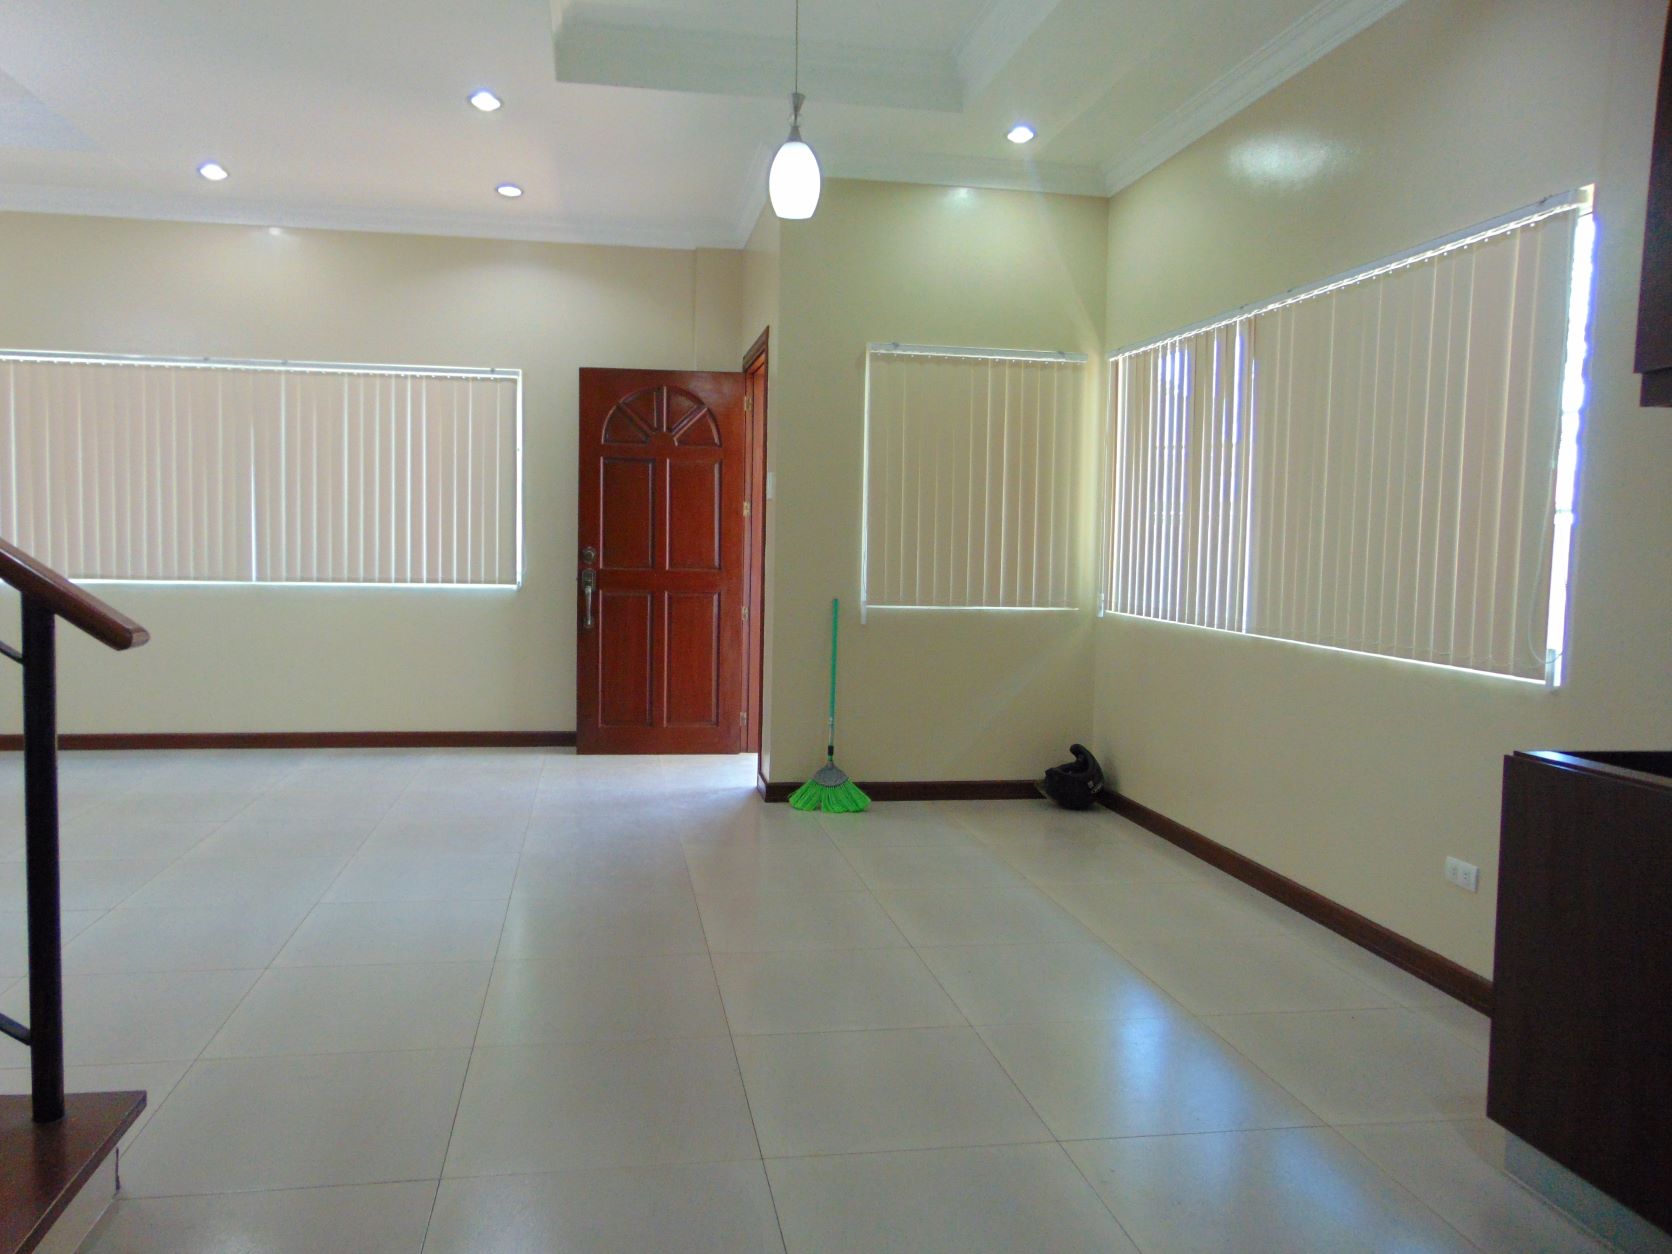 4-bedroom-semi-furnished-house-located-in-mabolo-cebu-city